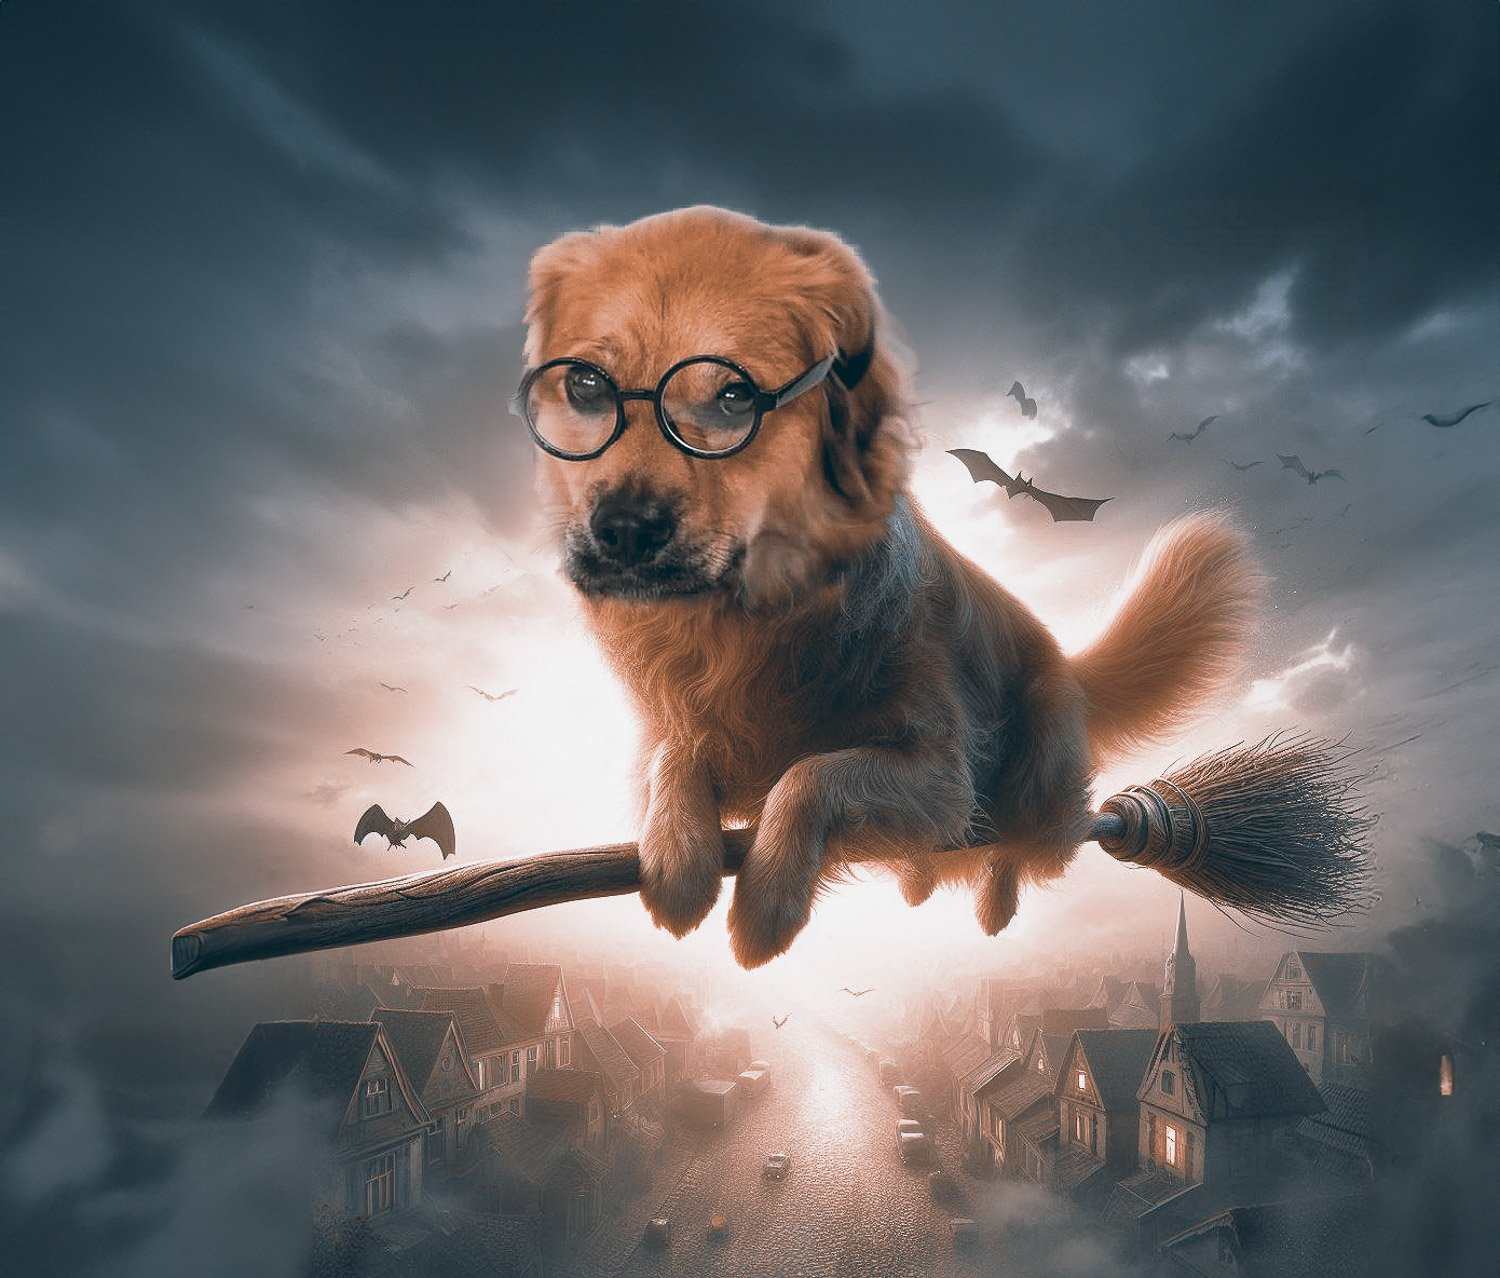 A reddish brown dog wearing reading glasses riding a broomstick high above a village town